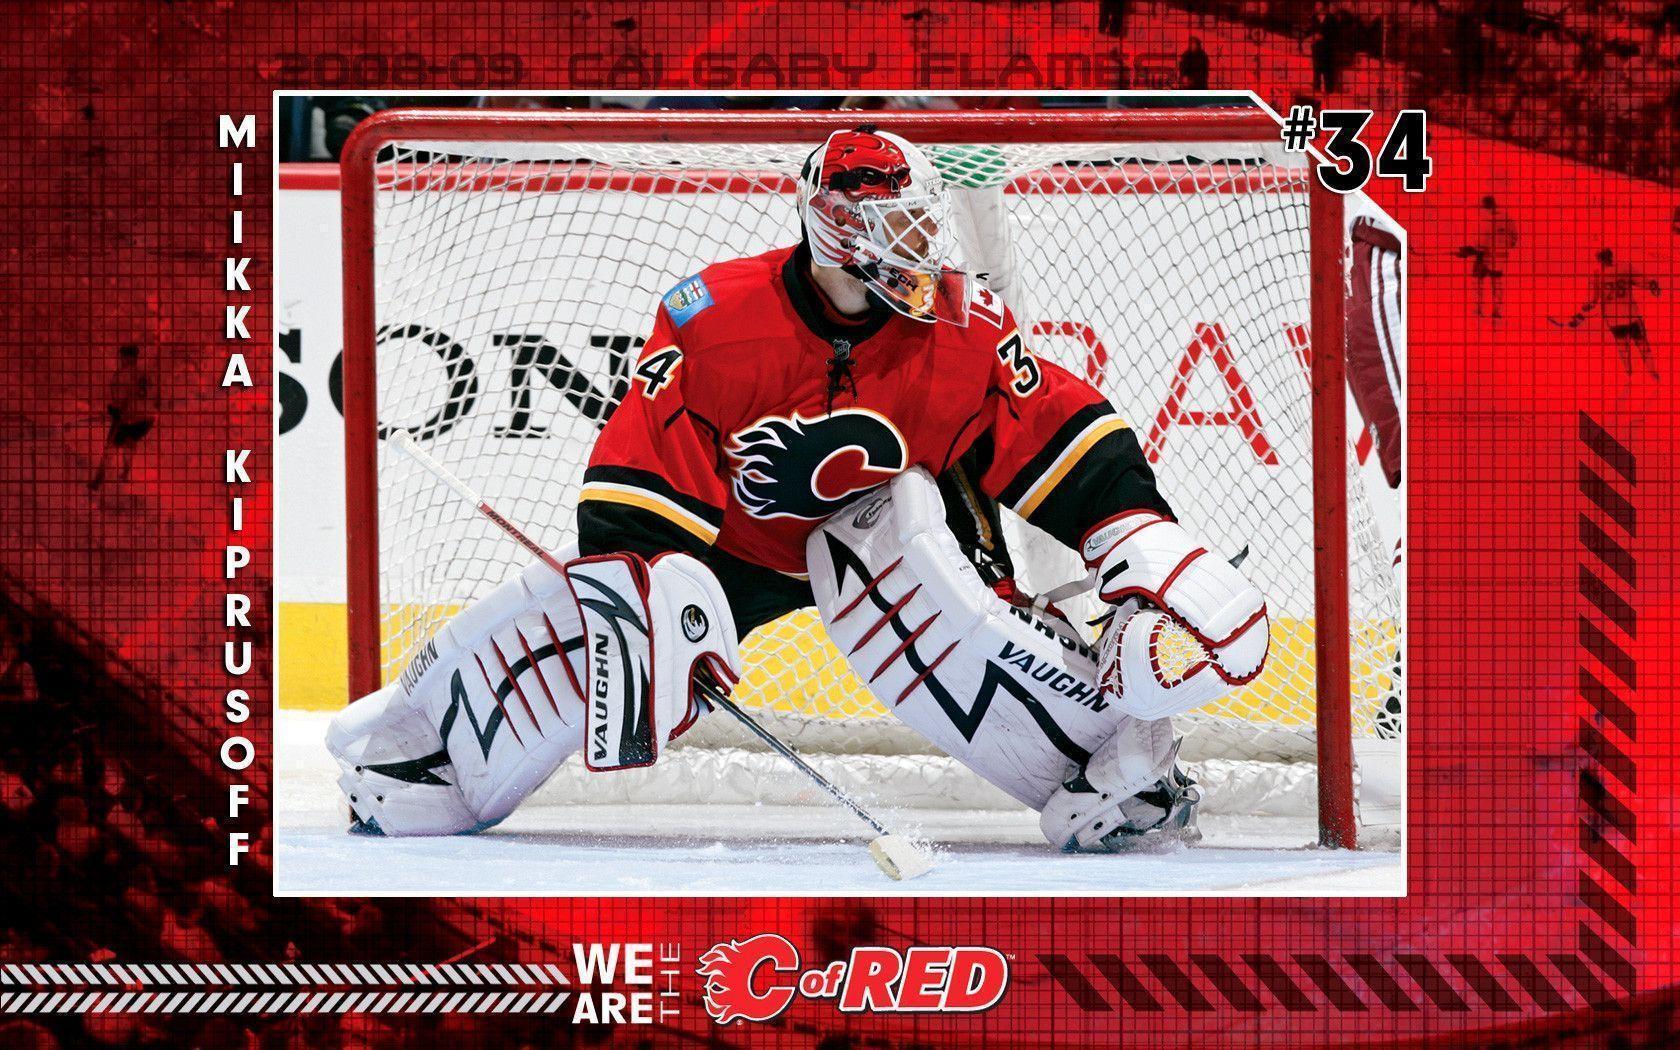 Download Awesome Calgary Flames Wallpaper. Make FB Cover Photo